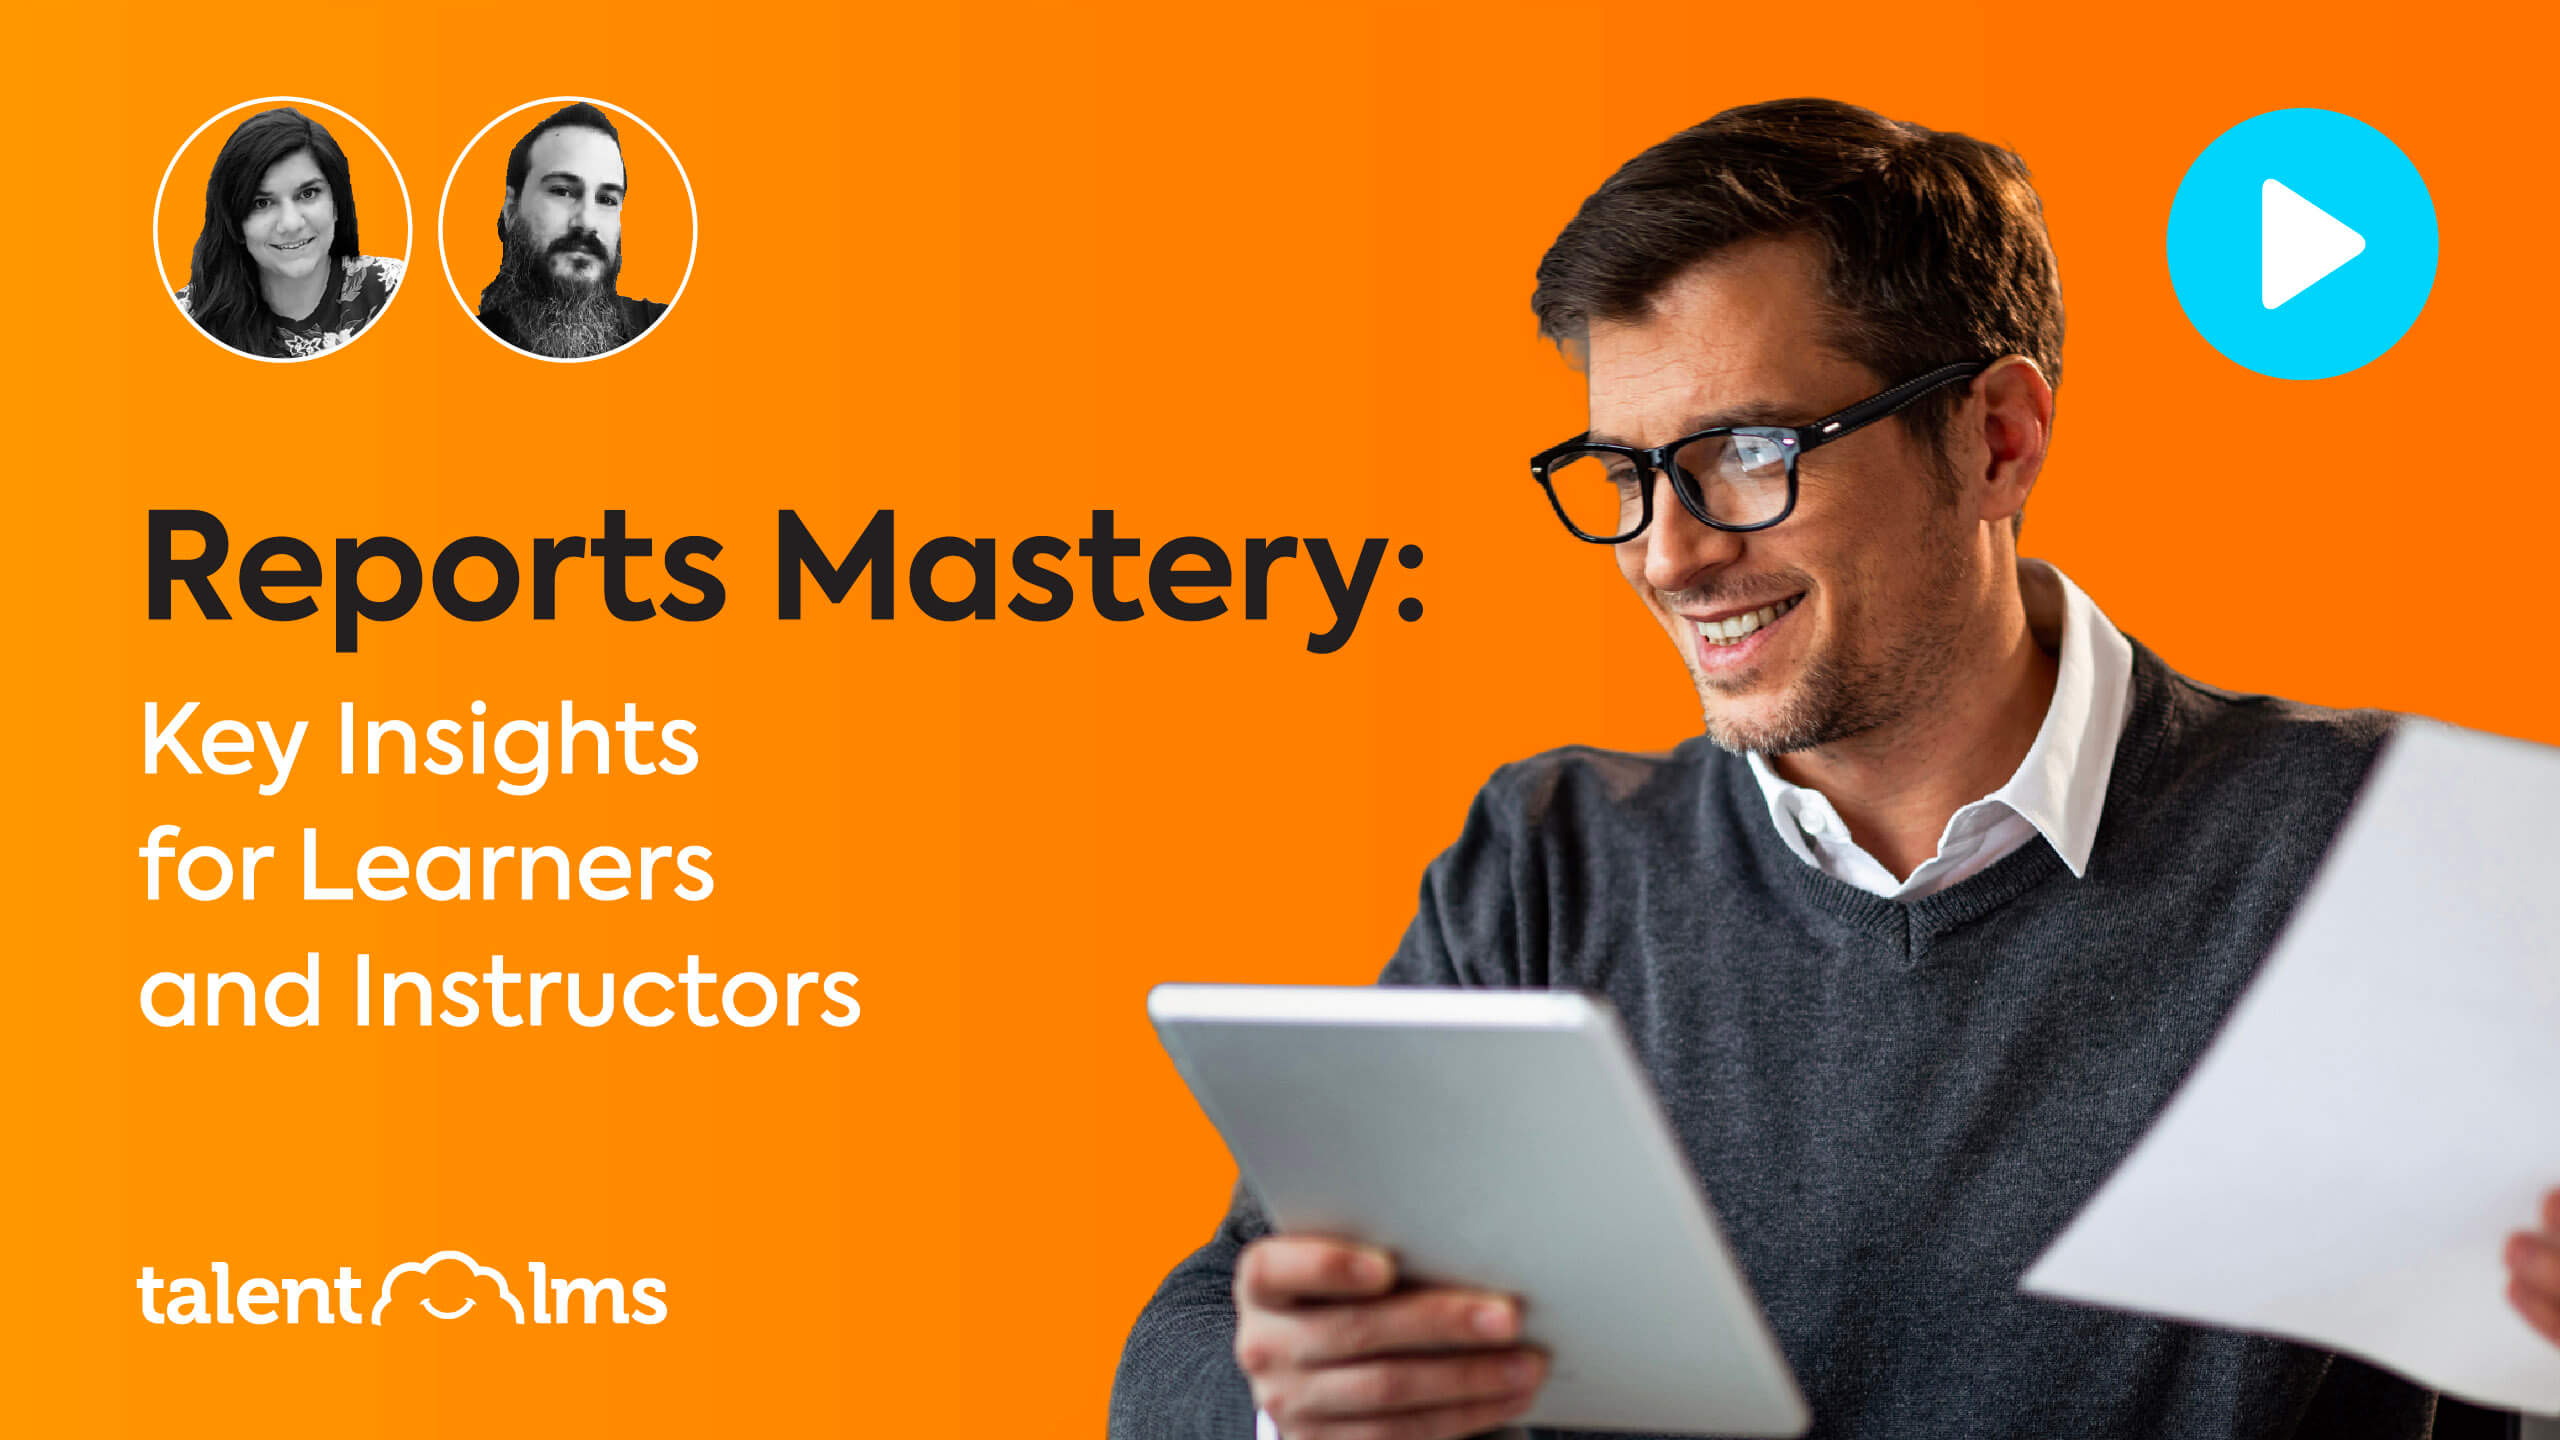 Reports Mastery: Key Insights for Learners and Instructors